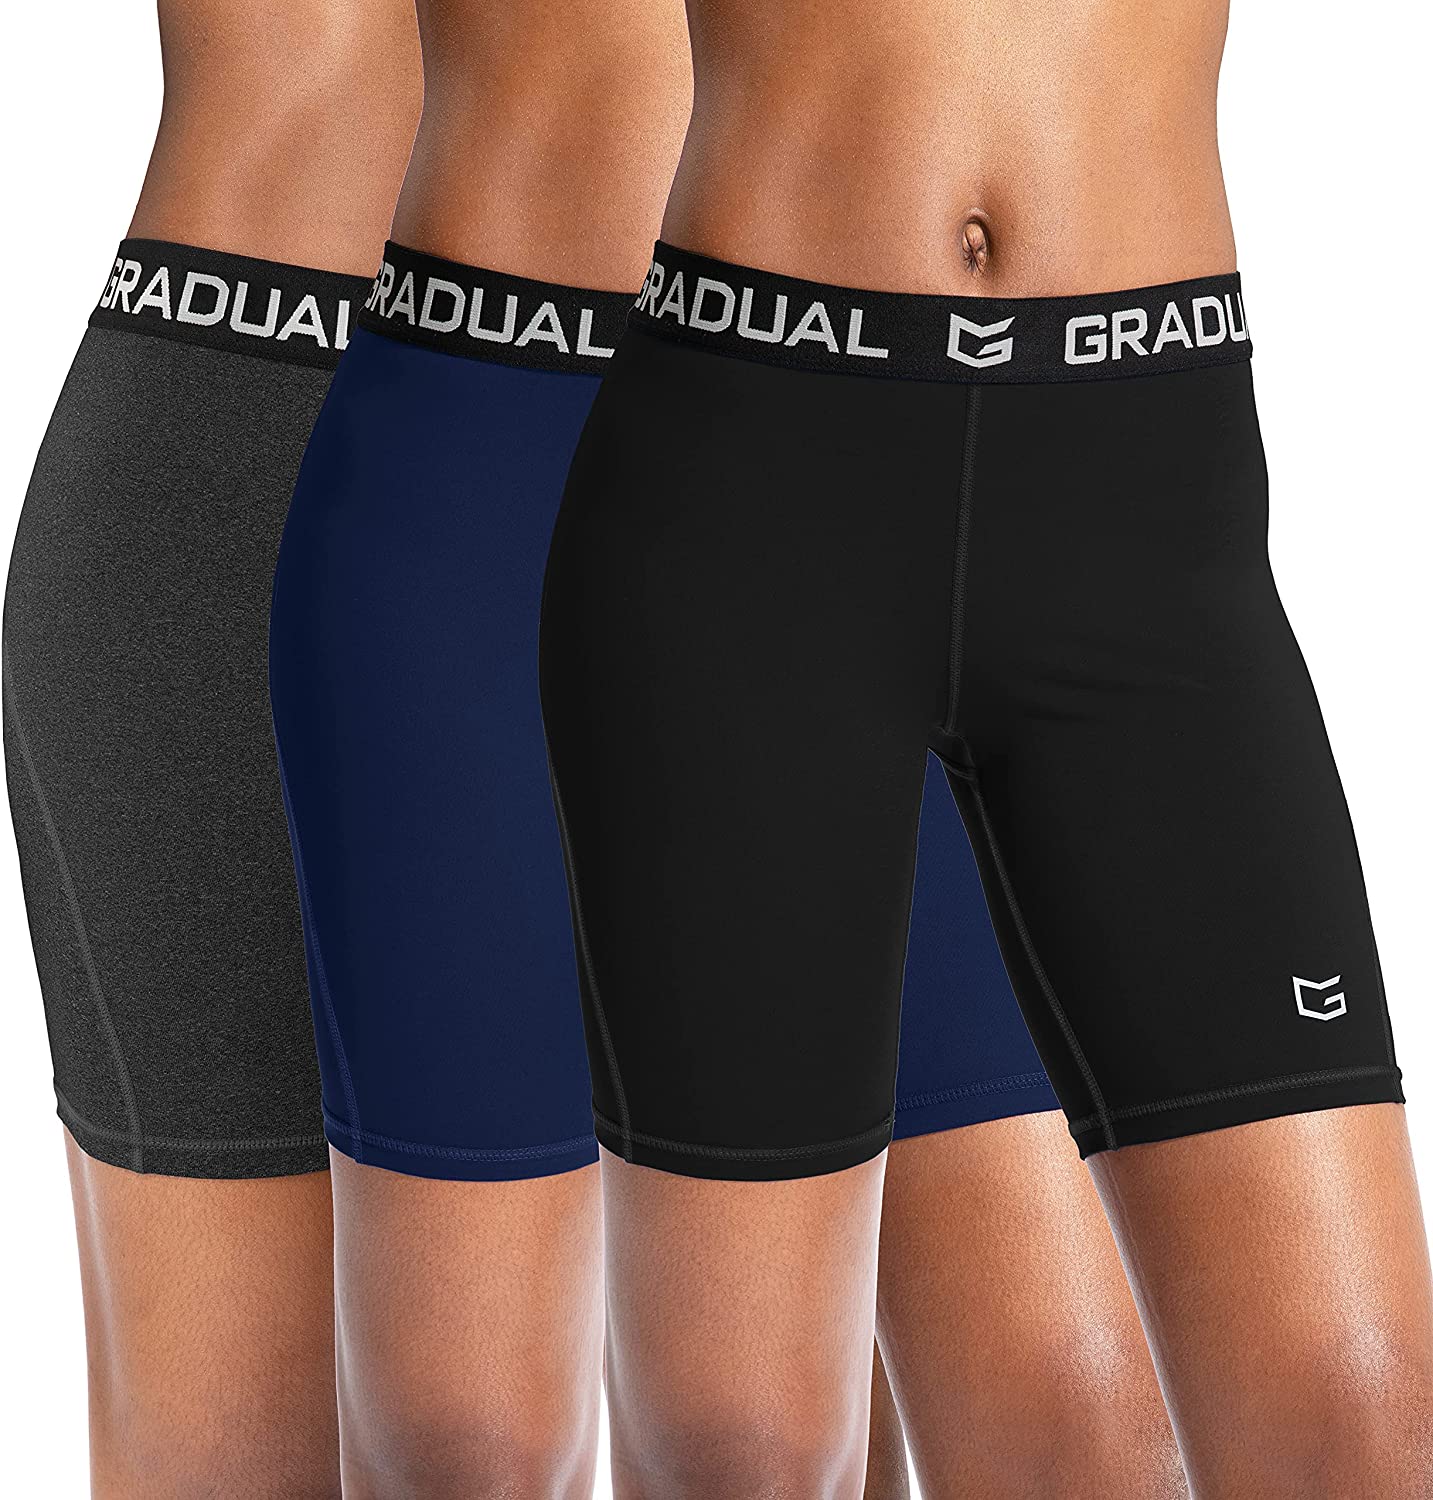  Women's Spandex Compression Volleyball Shorts 3 /7